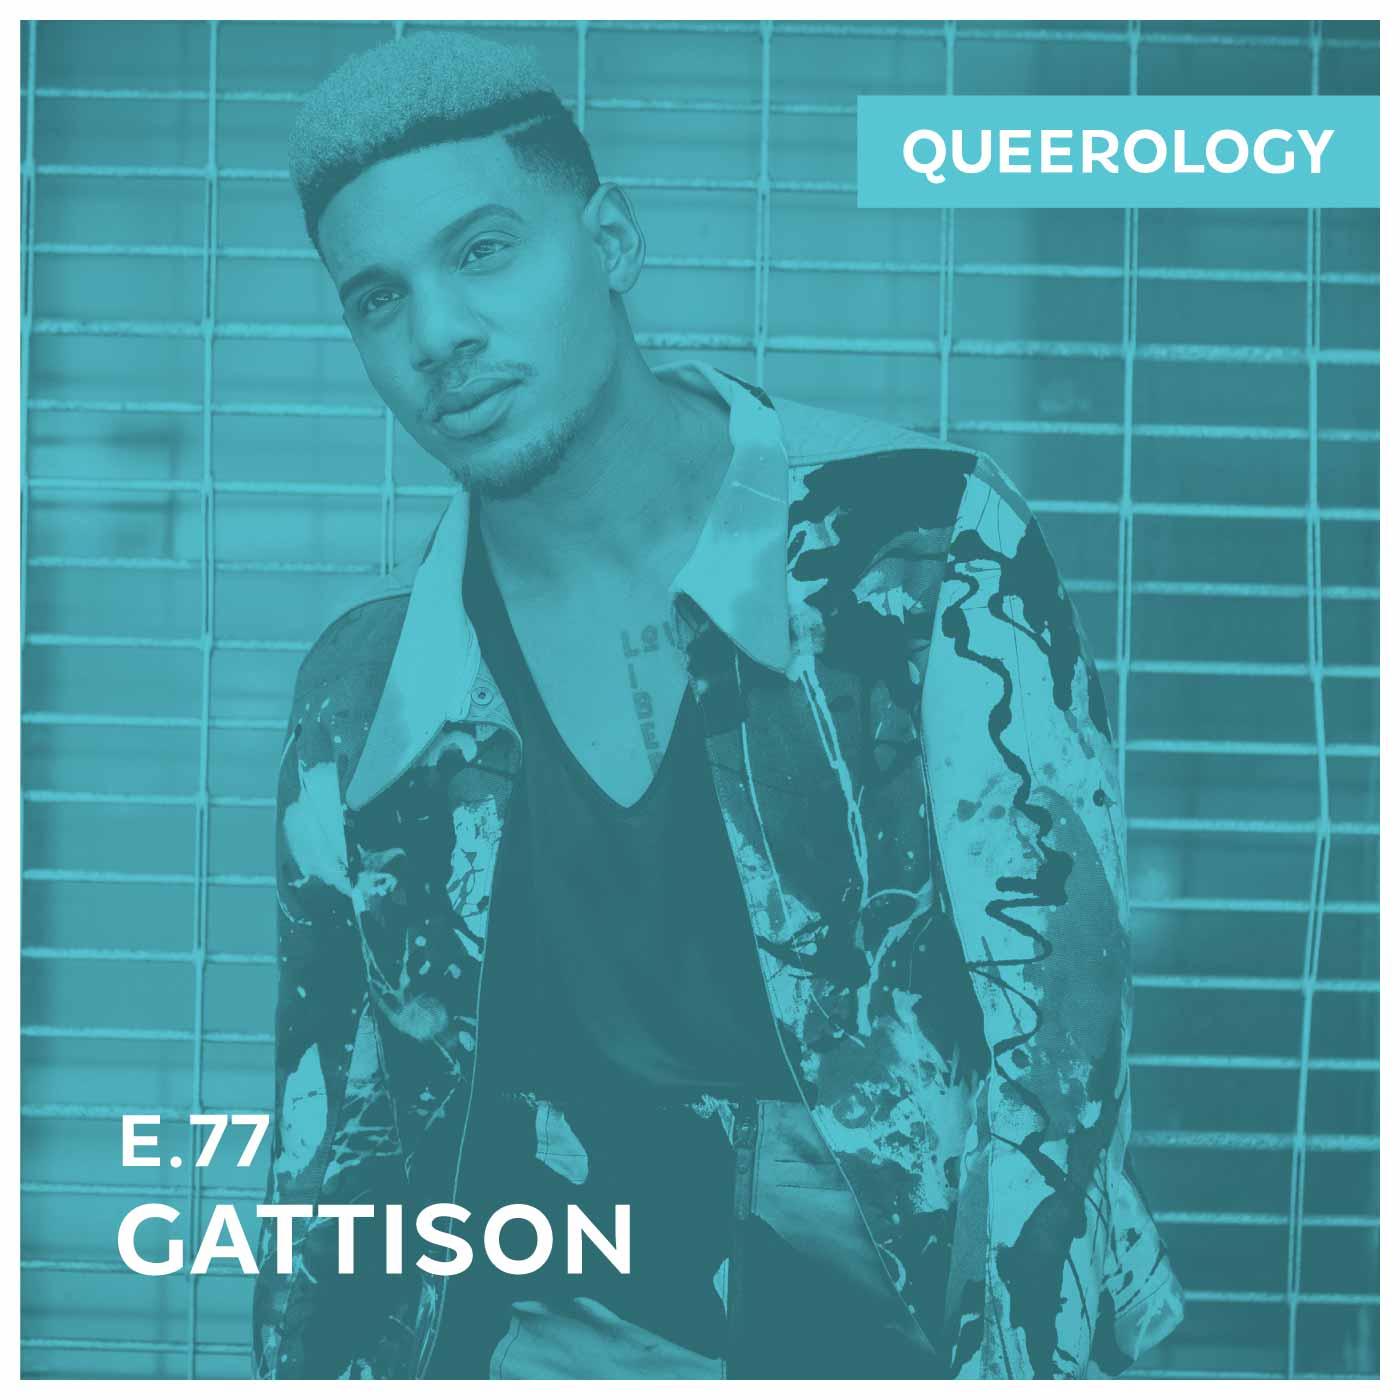 Gattison is Not #OnceGay